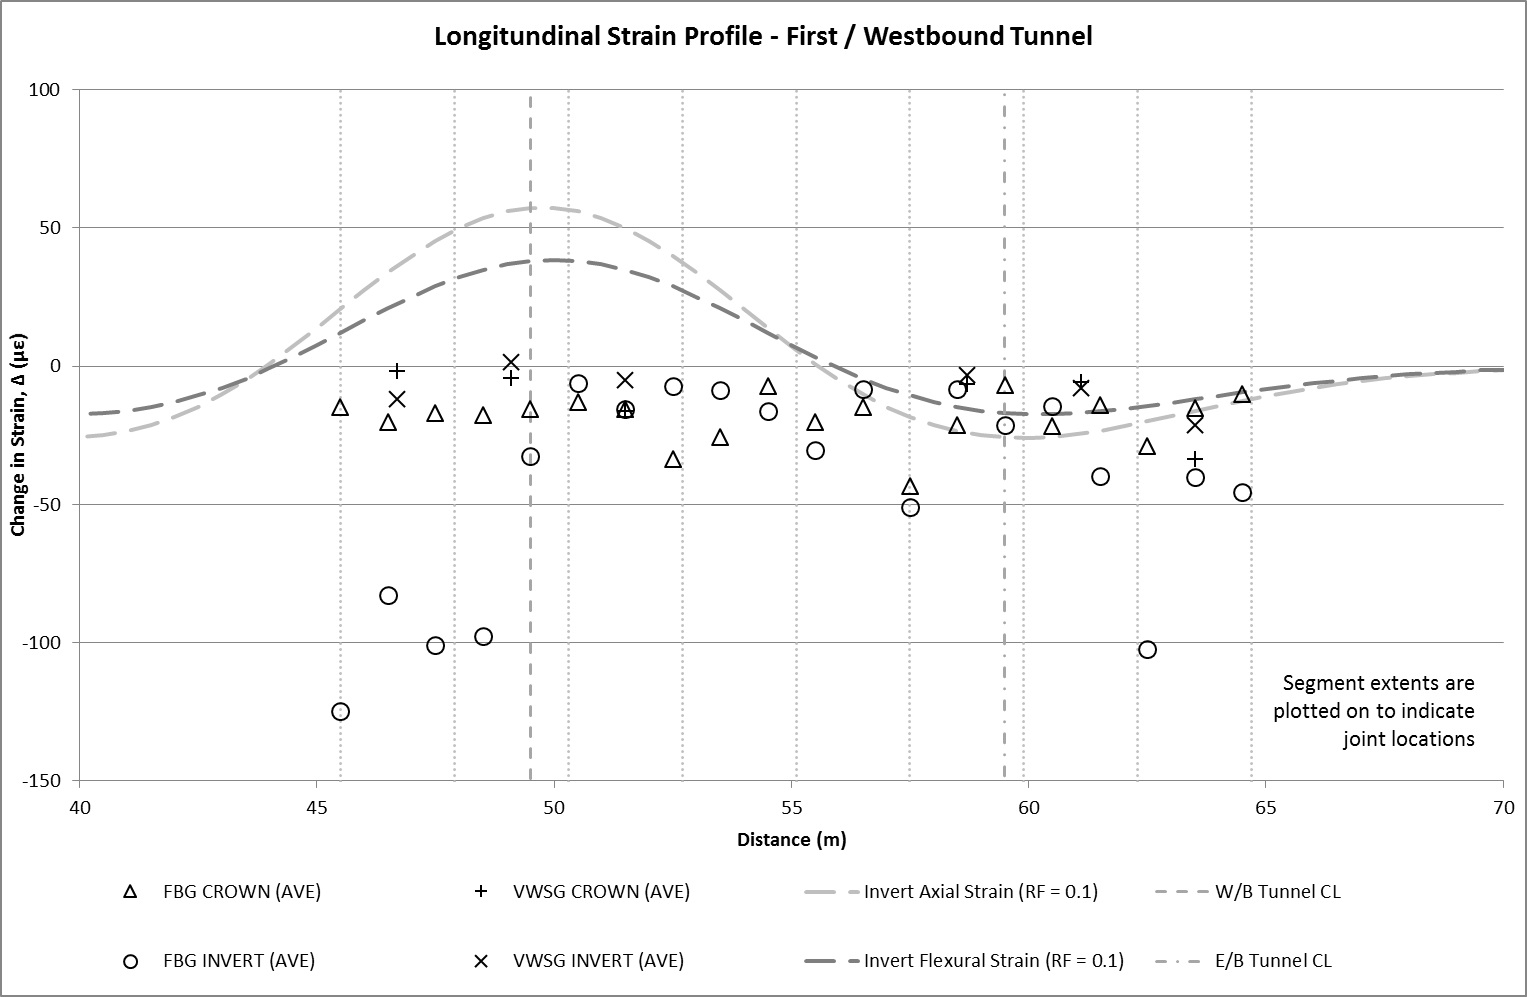 Figure 13a - Longitudinal strain profile after first / westbound tunnel construction